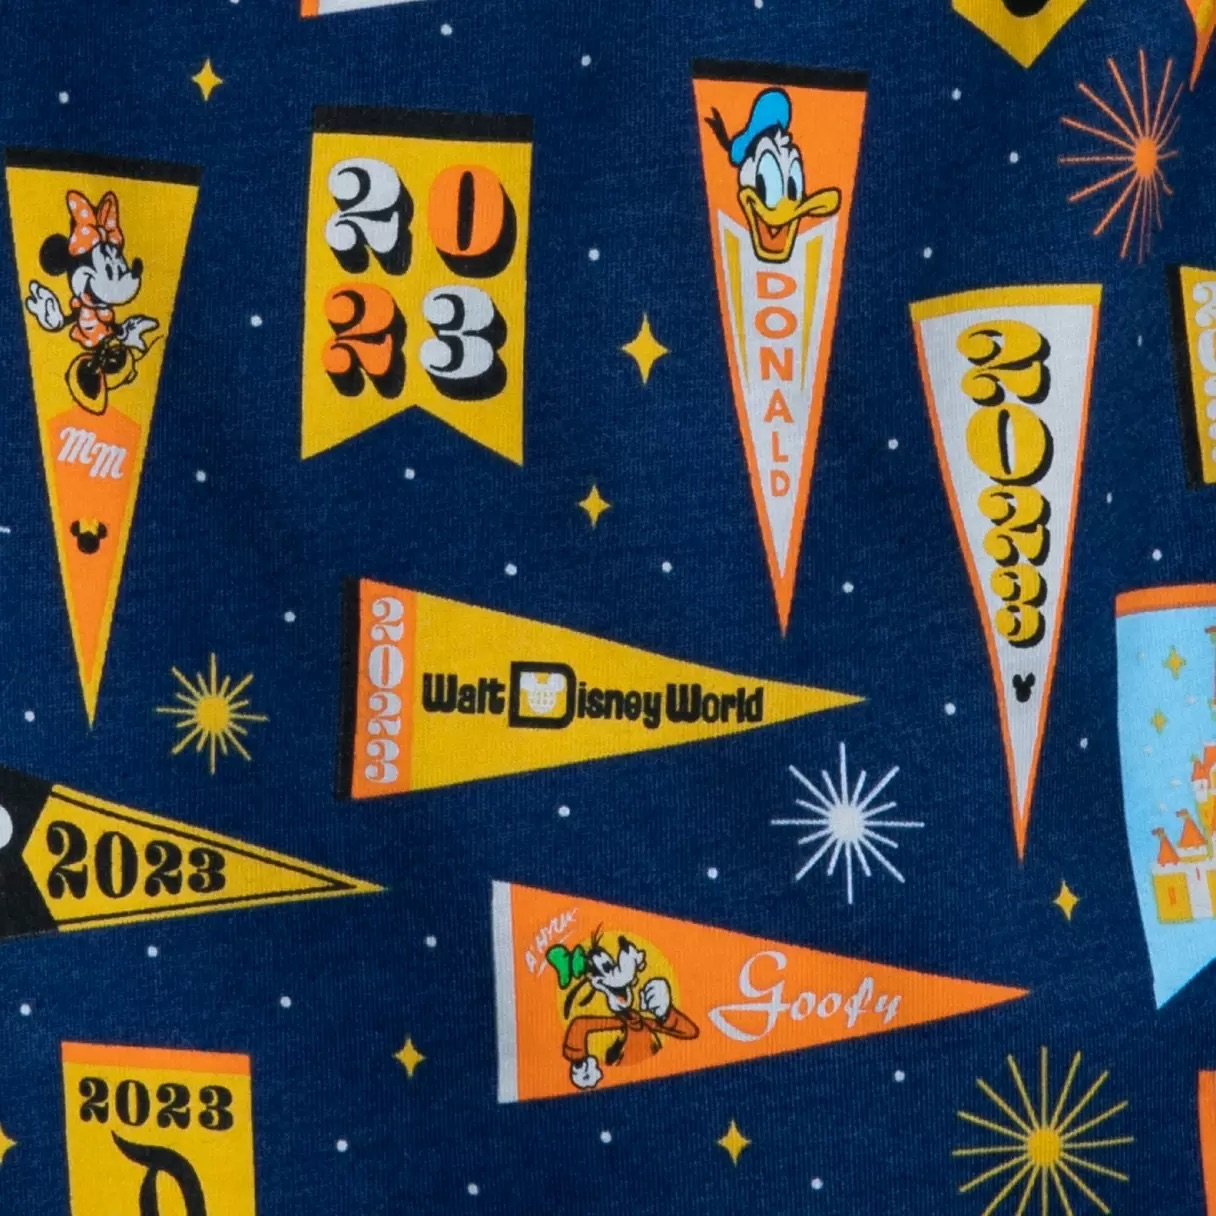 ST. LOUIS BLUES MICKEY MOUSE DISNEY PREMIUM QUALITY PENNANT 12X30 BANNER